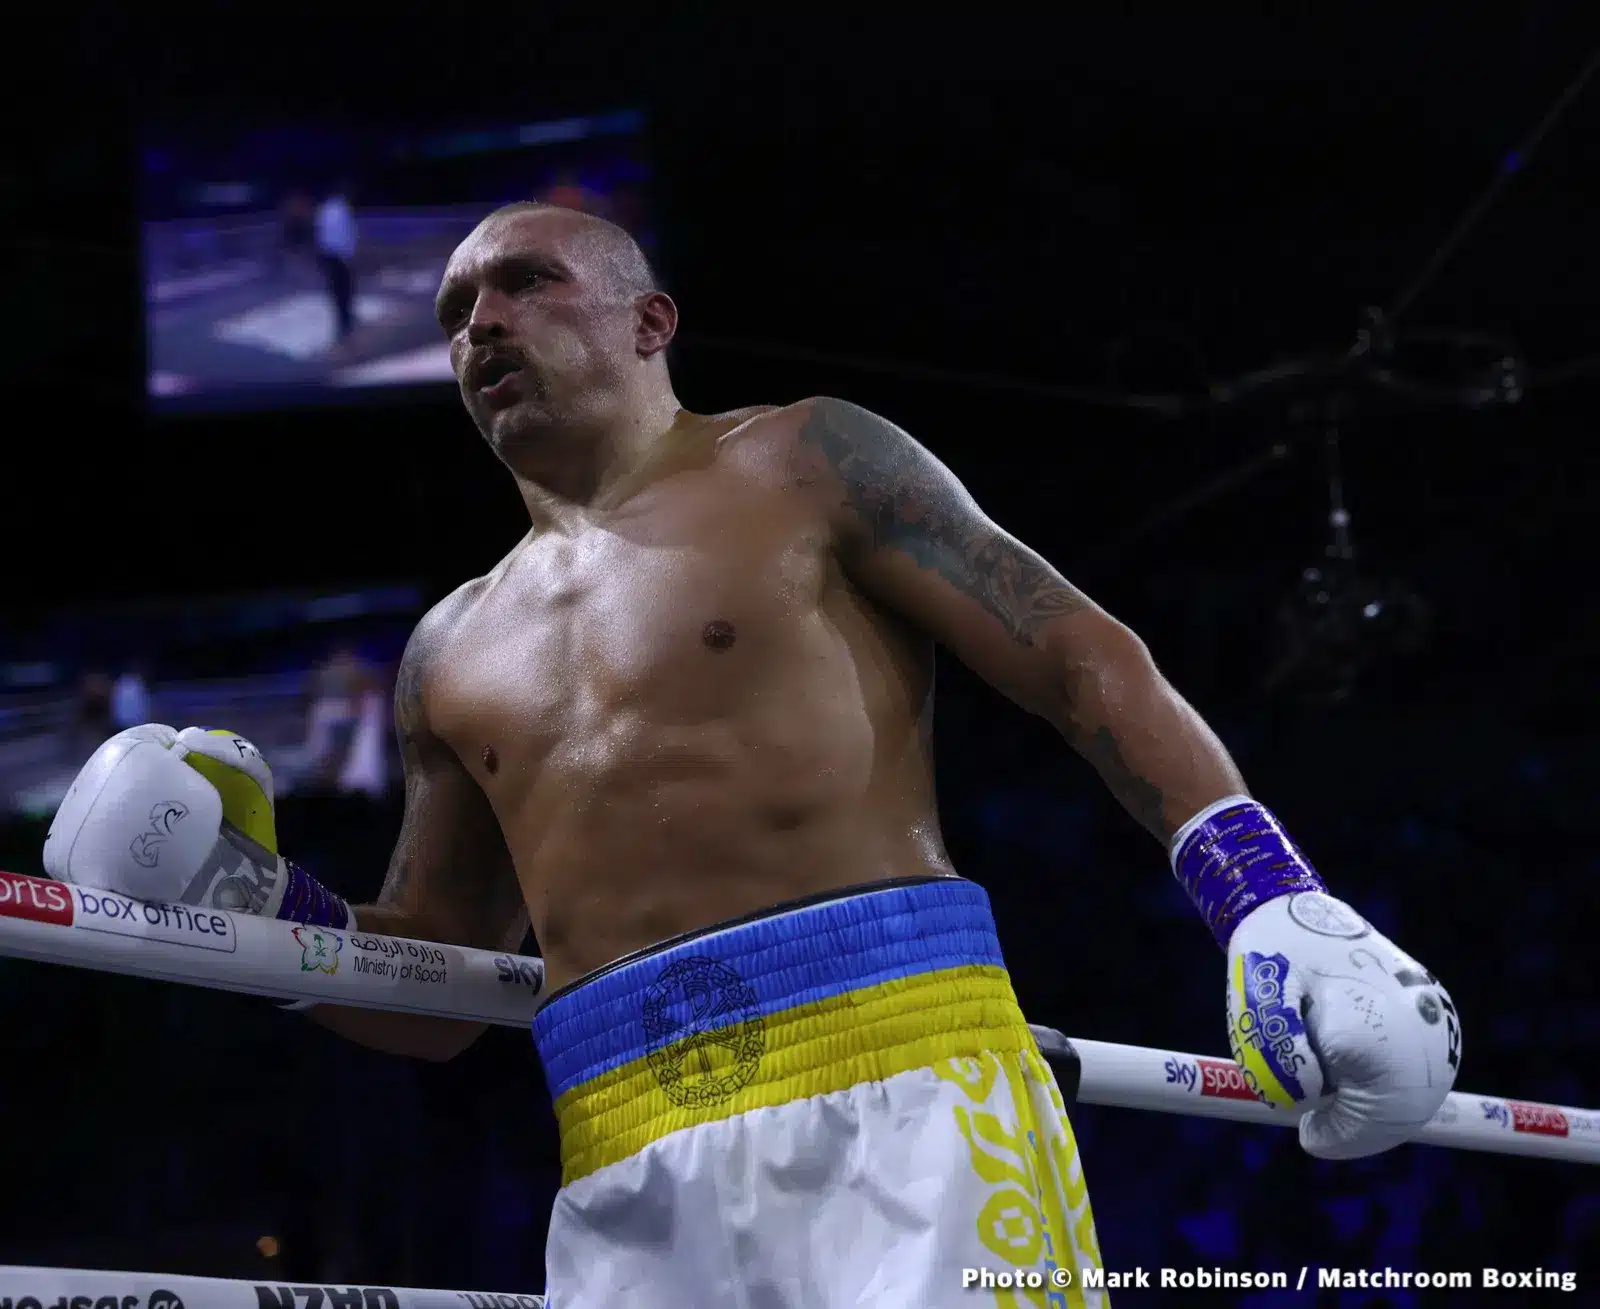 Image: Oleksandr Usyk gives Fury a deadline: "The clock is ticking"